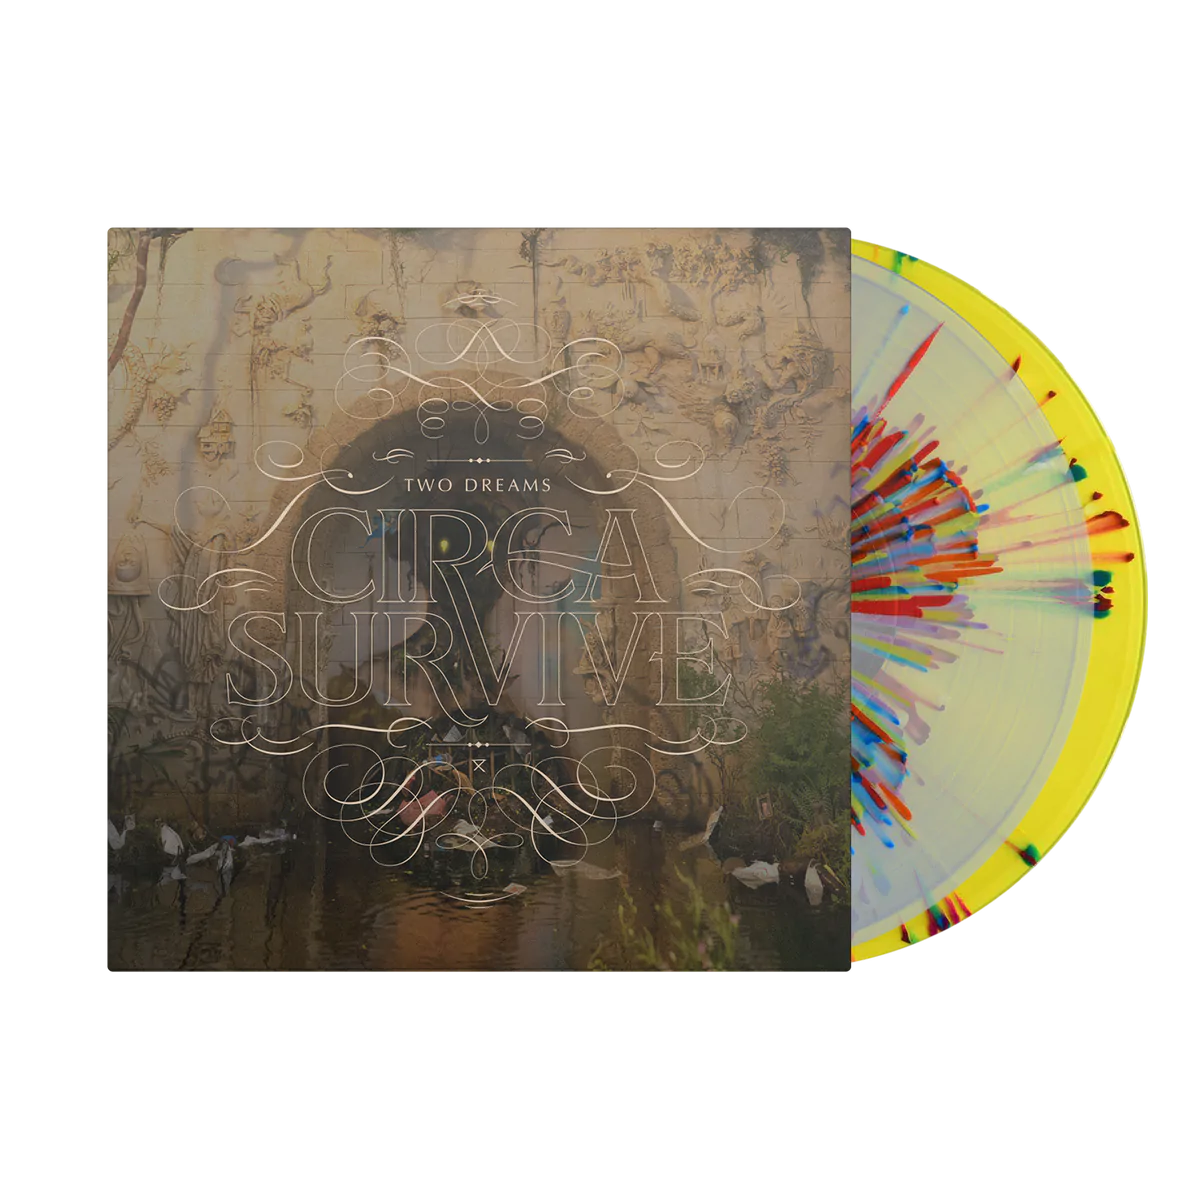 Circa Survive - Two Dreams (2LP 1-Clear with Red, White & Blue Splatter 2-Yellow with Red, White & Blue)